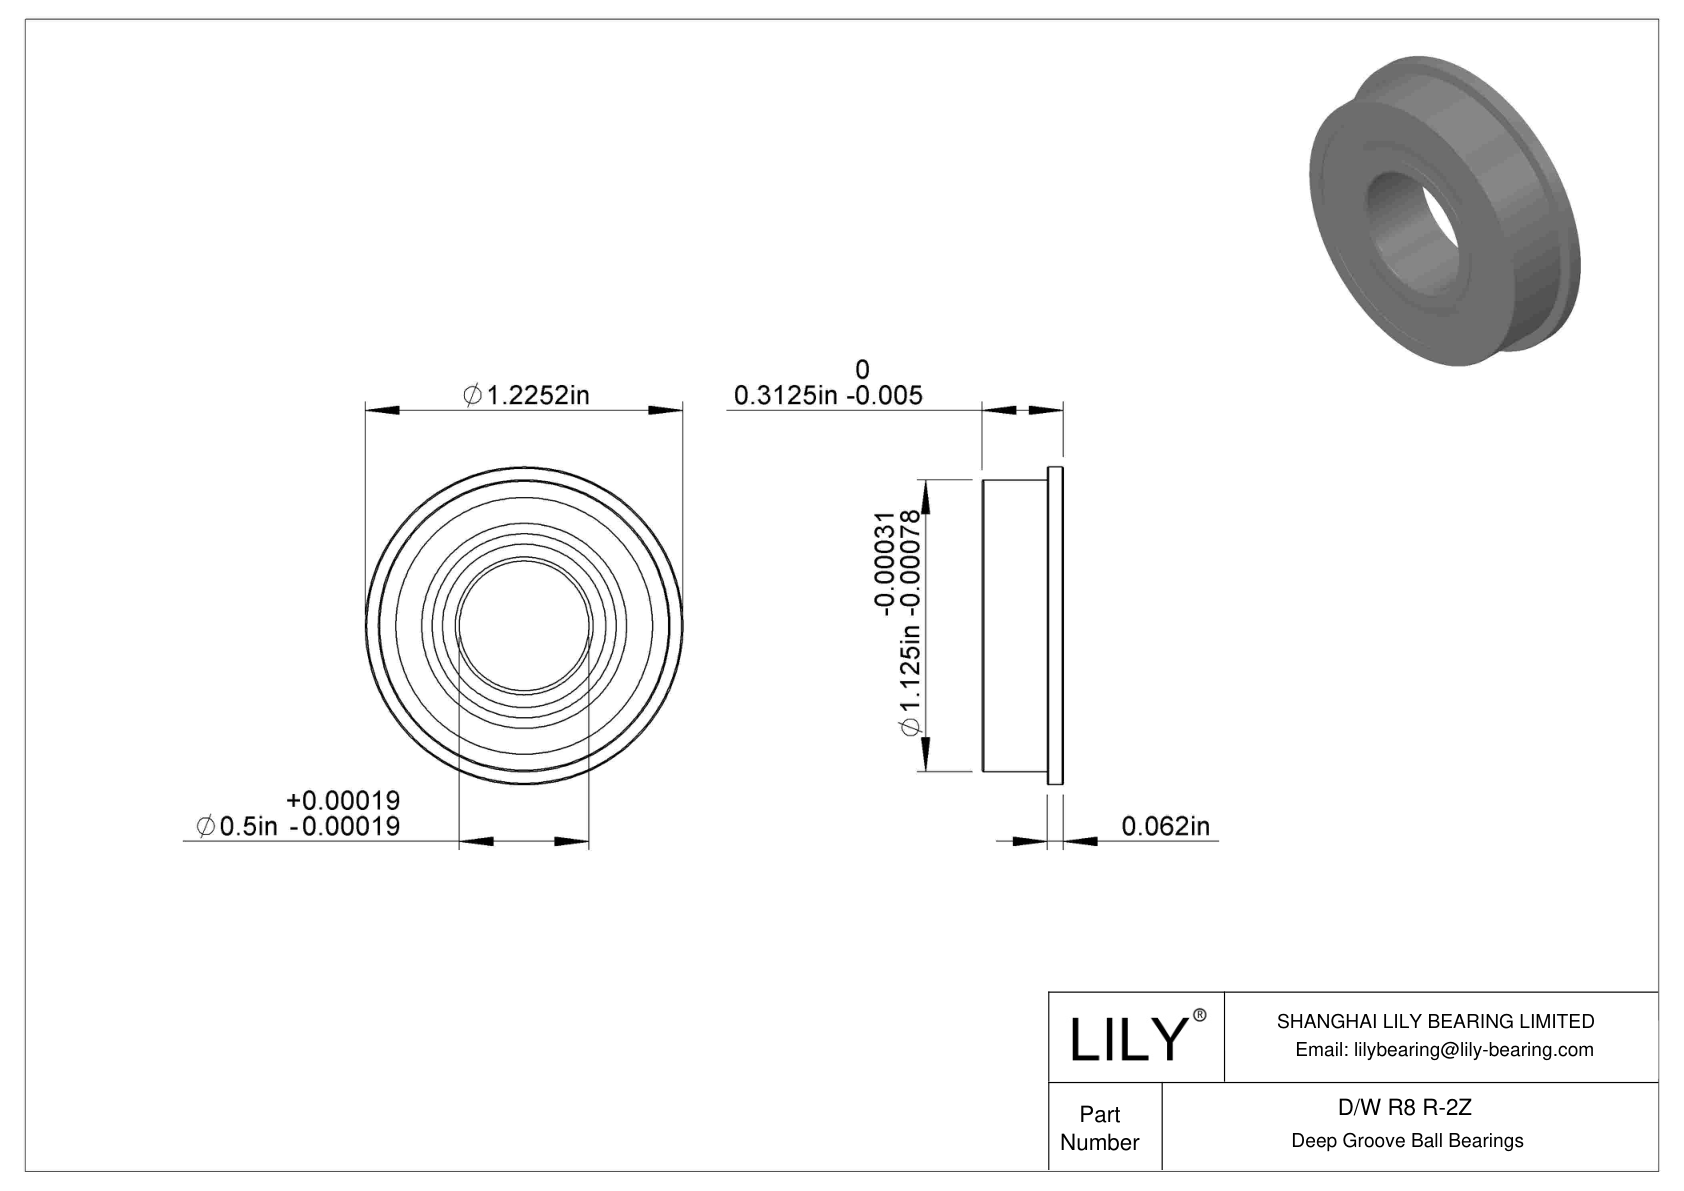 D/W R8 R-2Z Flanged Ball Bearings cad drawing